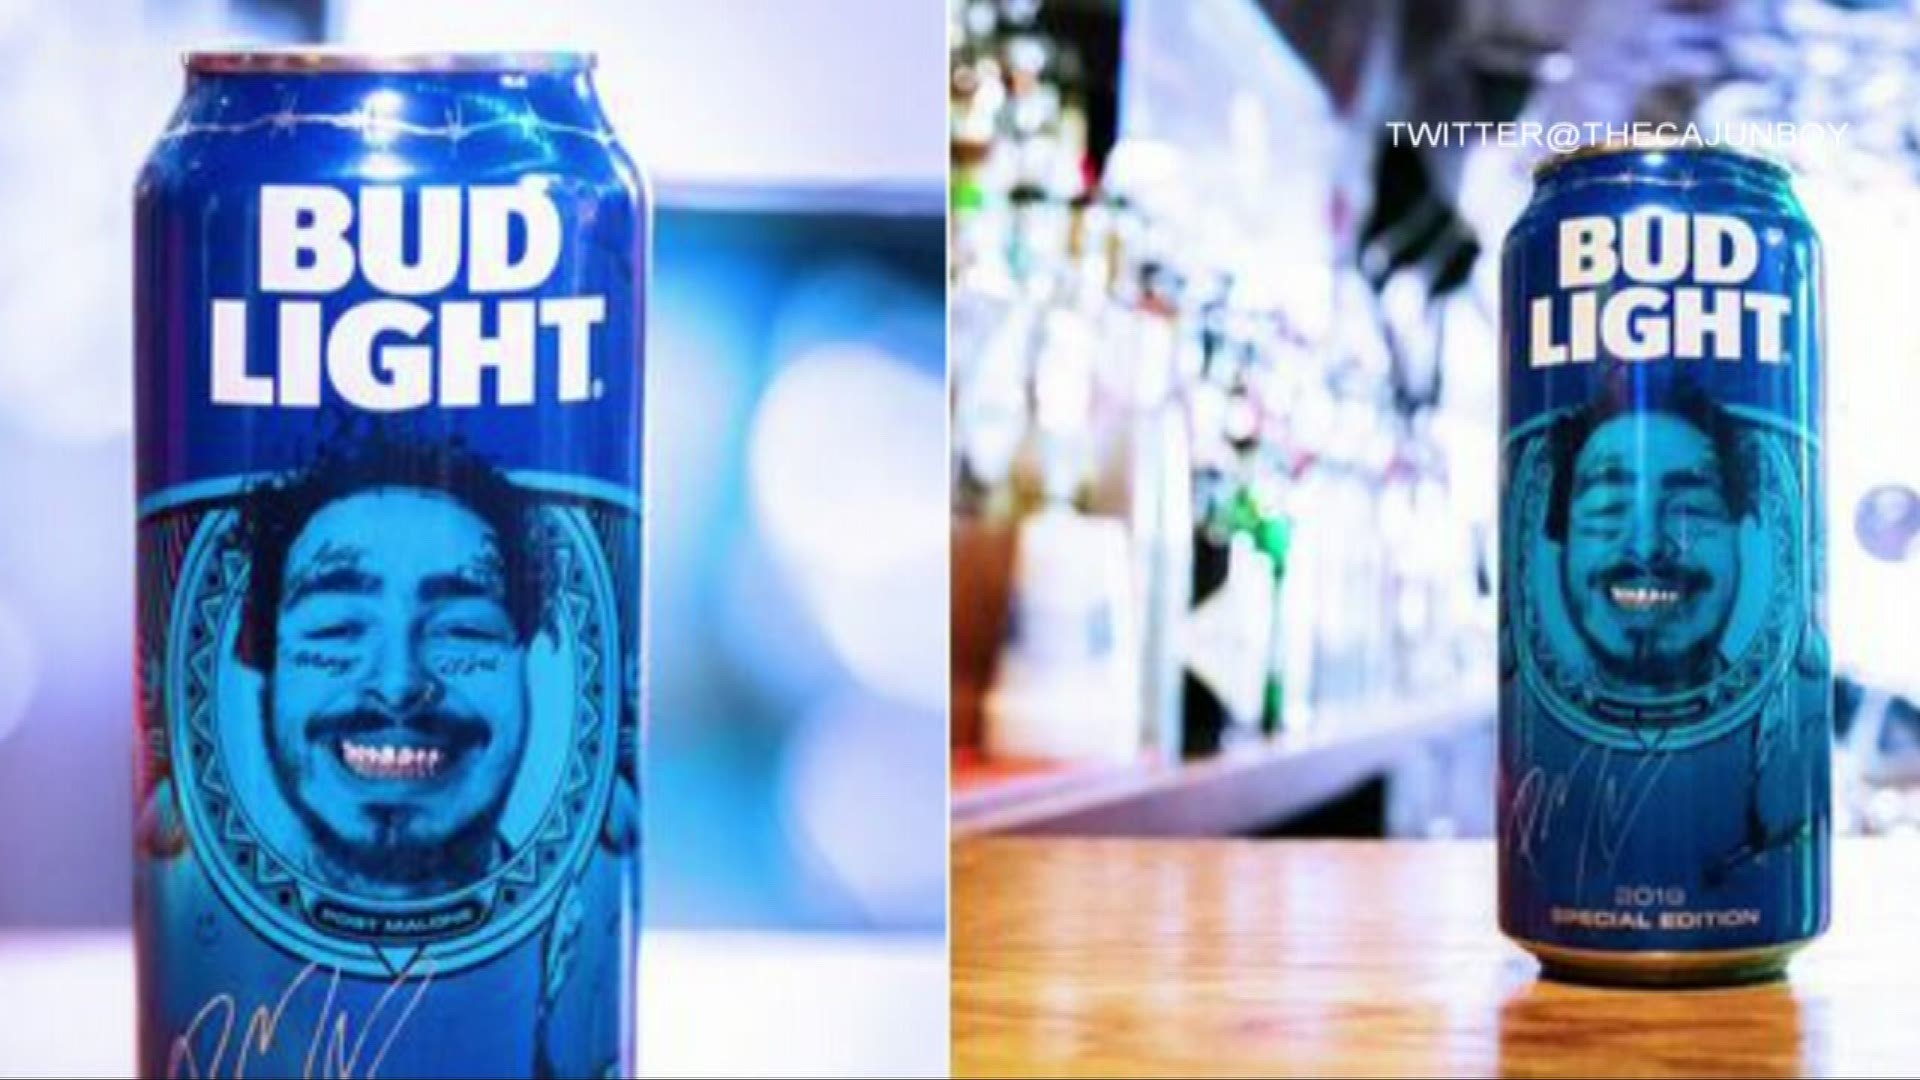 North Texas rapper Post Malone is making a splash-- onto Bud Light's beer cans.